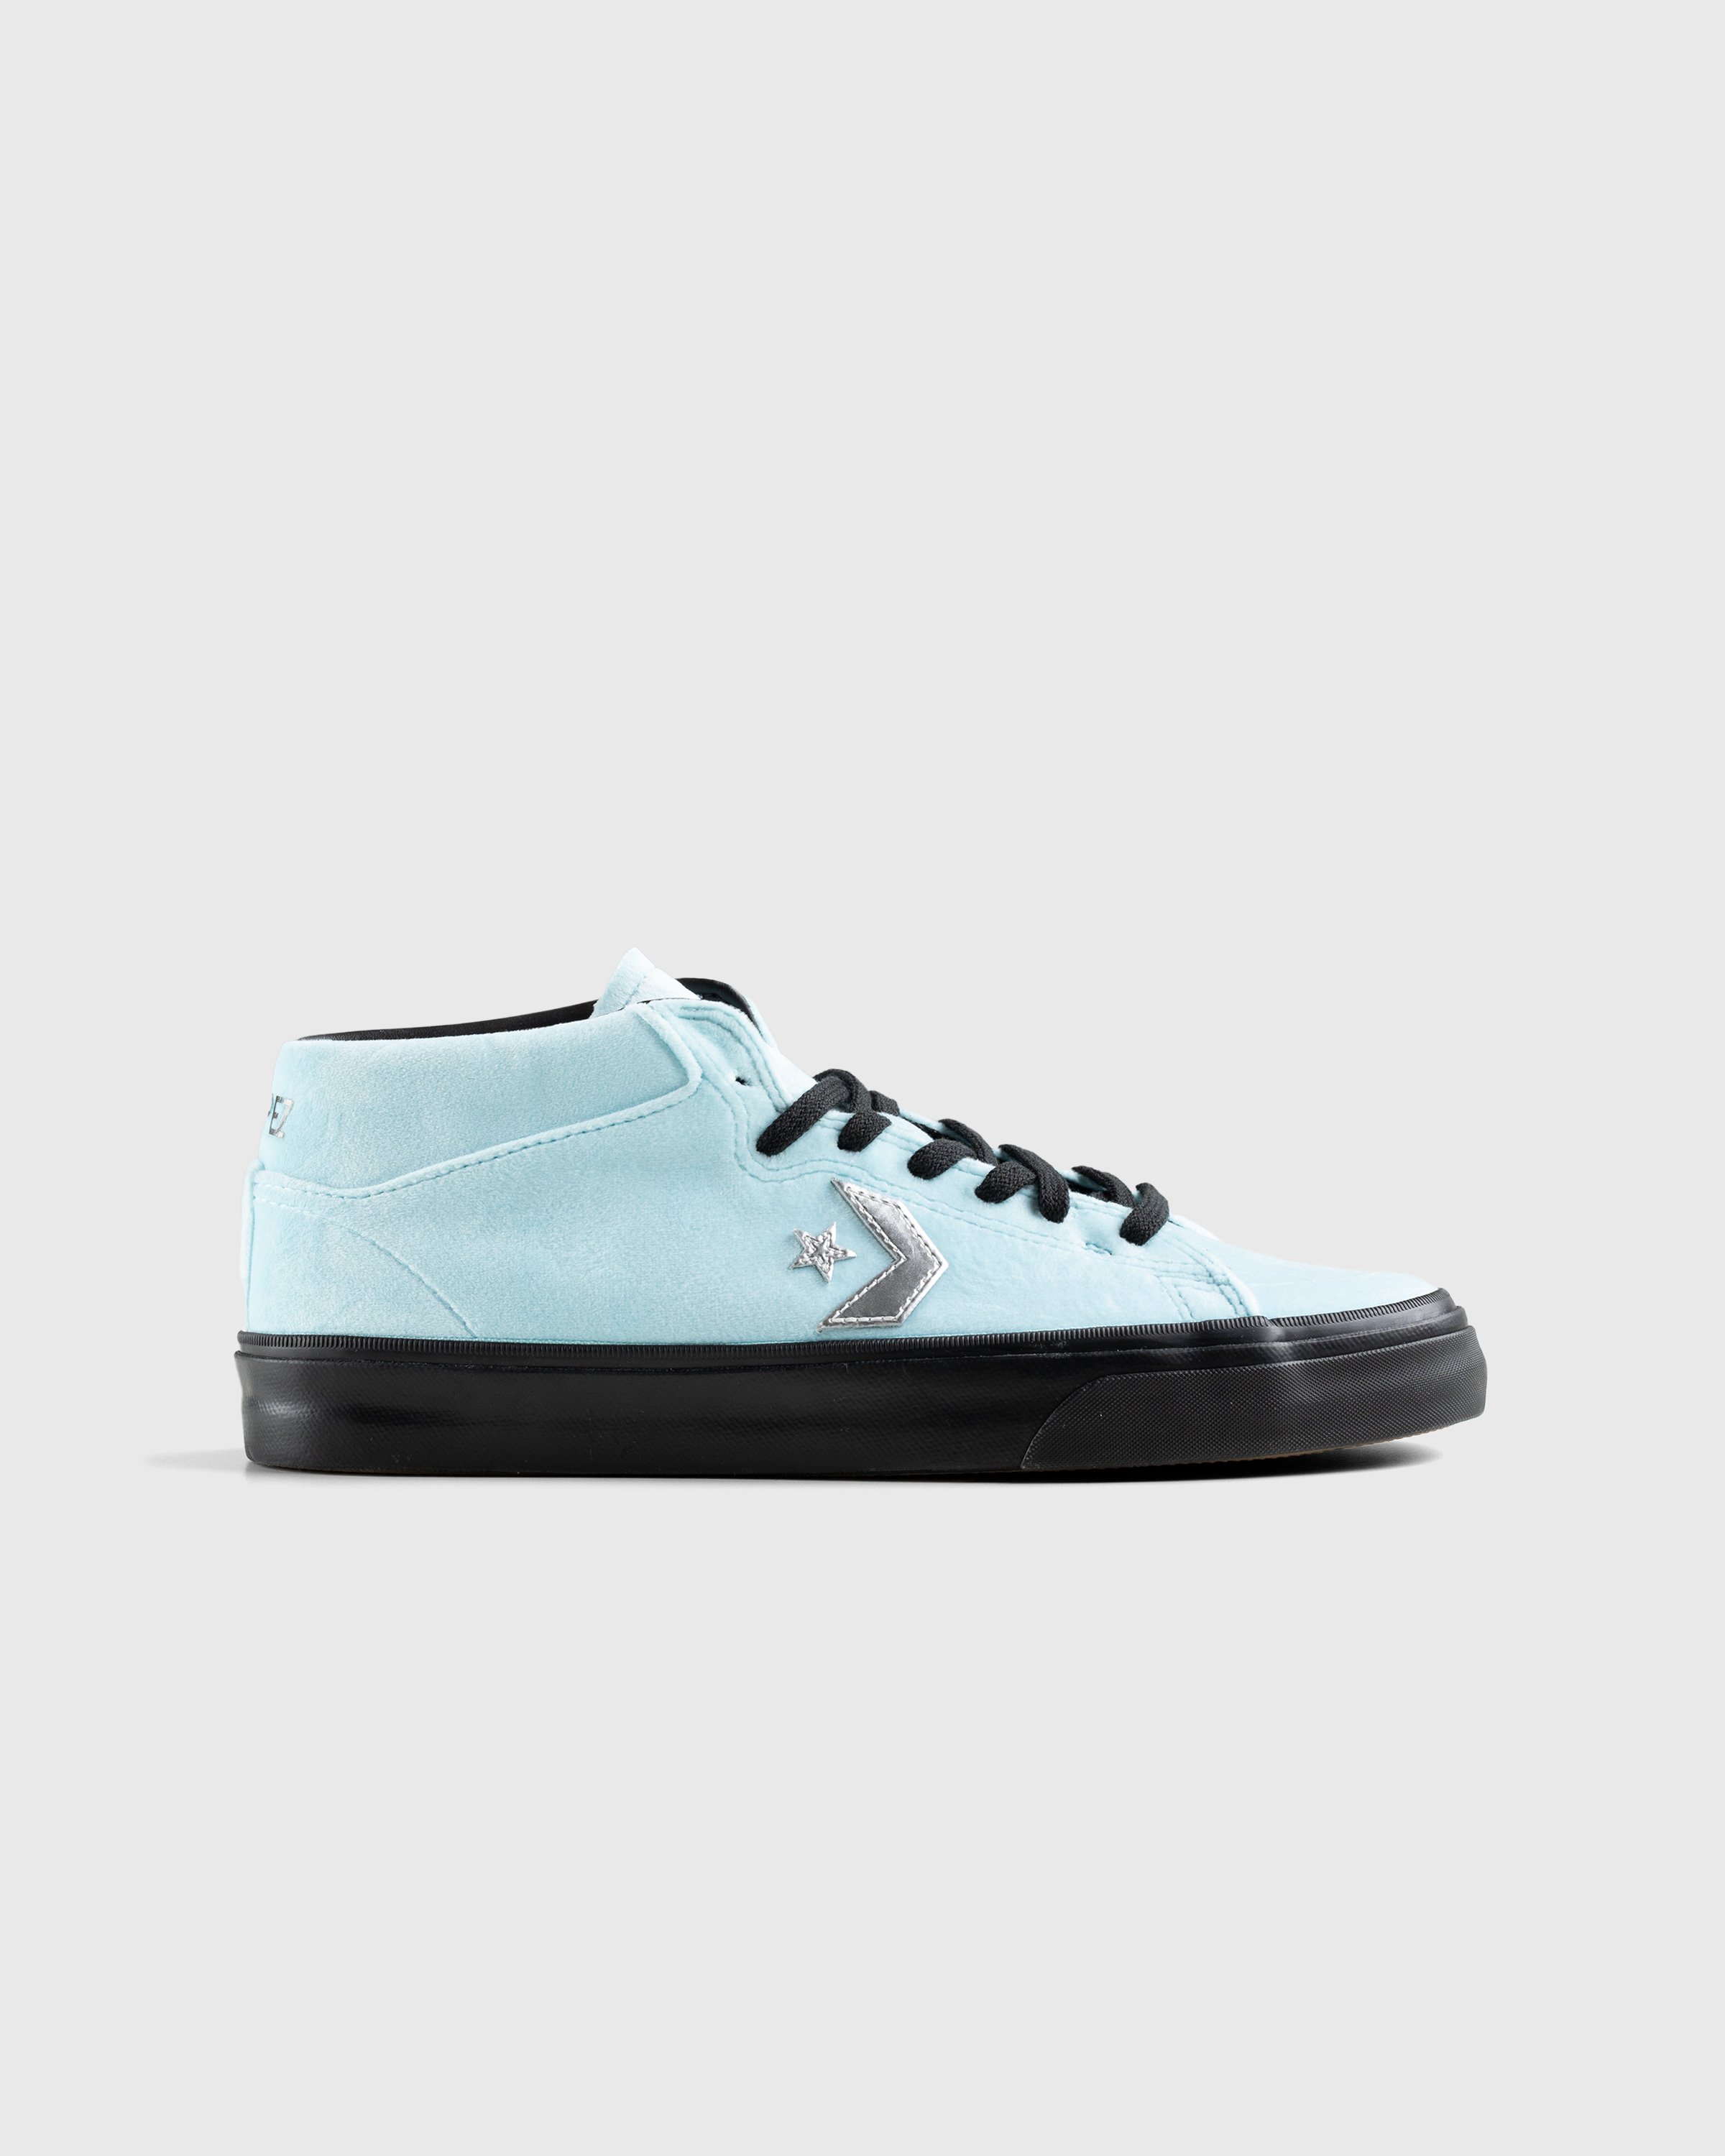 Converse x Fucking Awesome - Louie Lopez Pro Mid Cyan Tint/Black - Footwear - Blue - Image 1